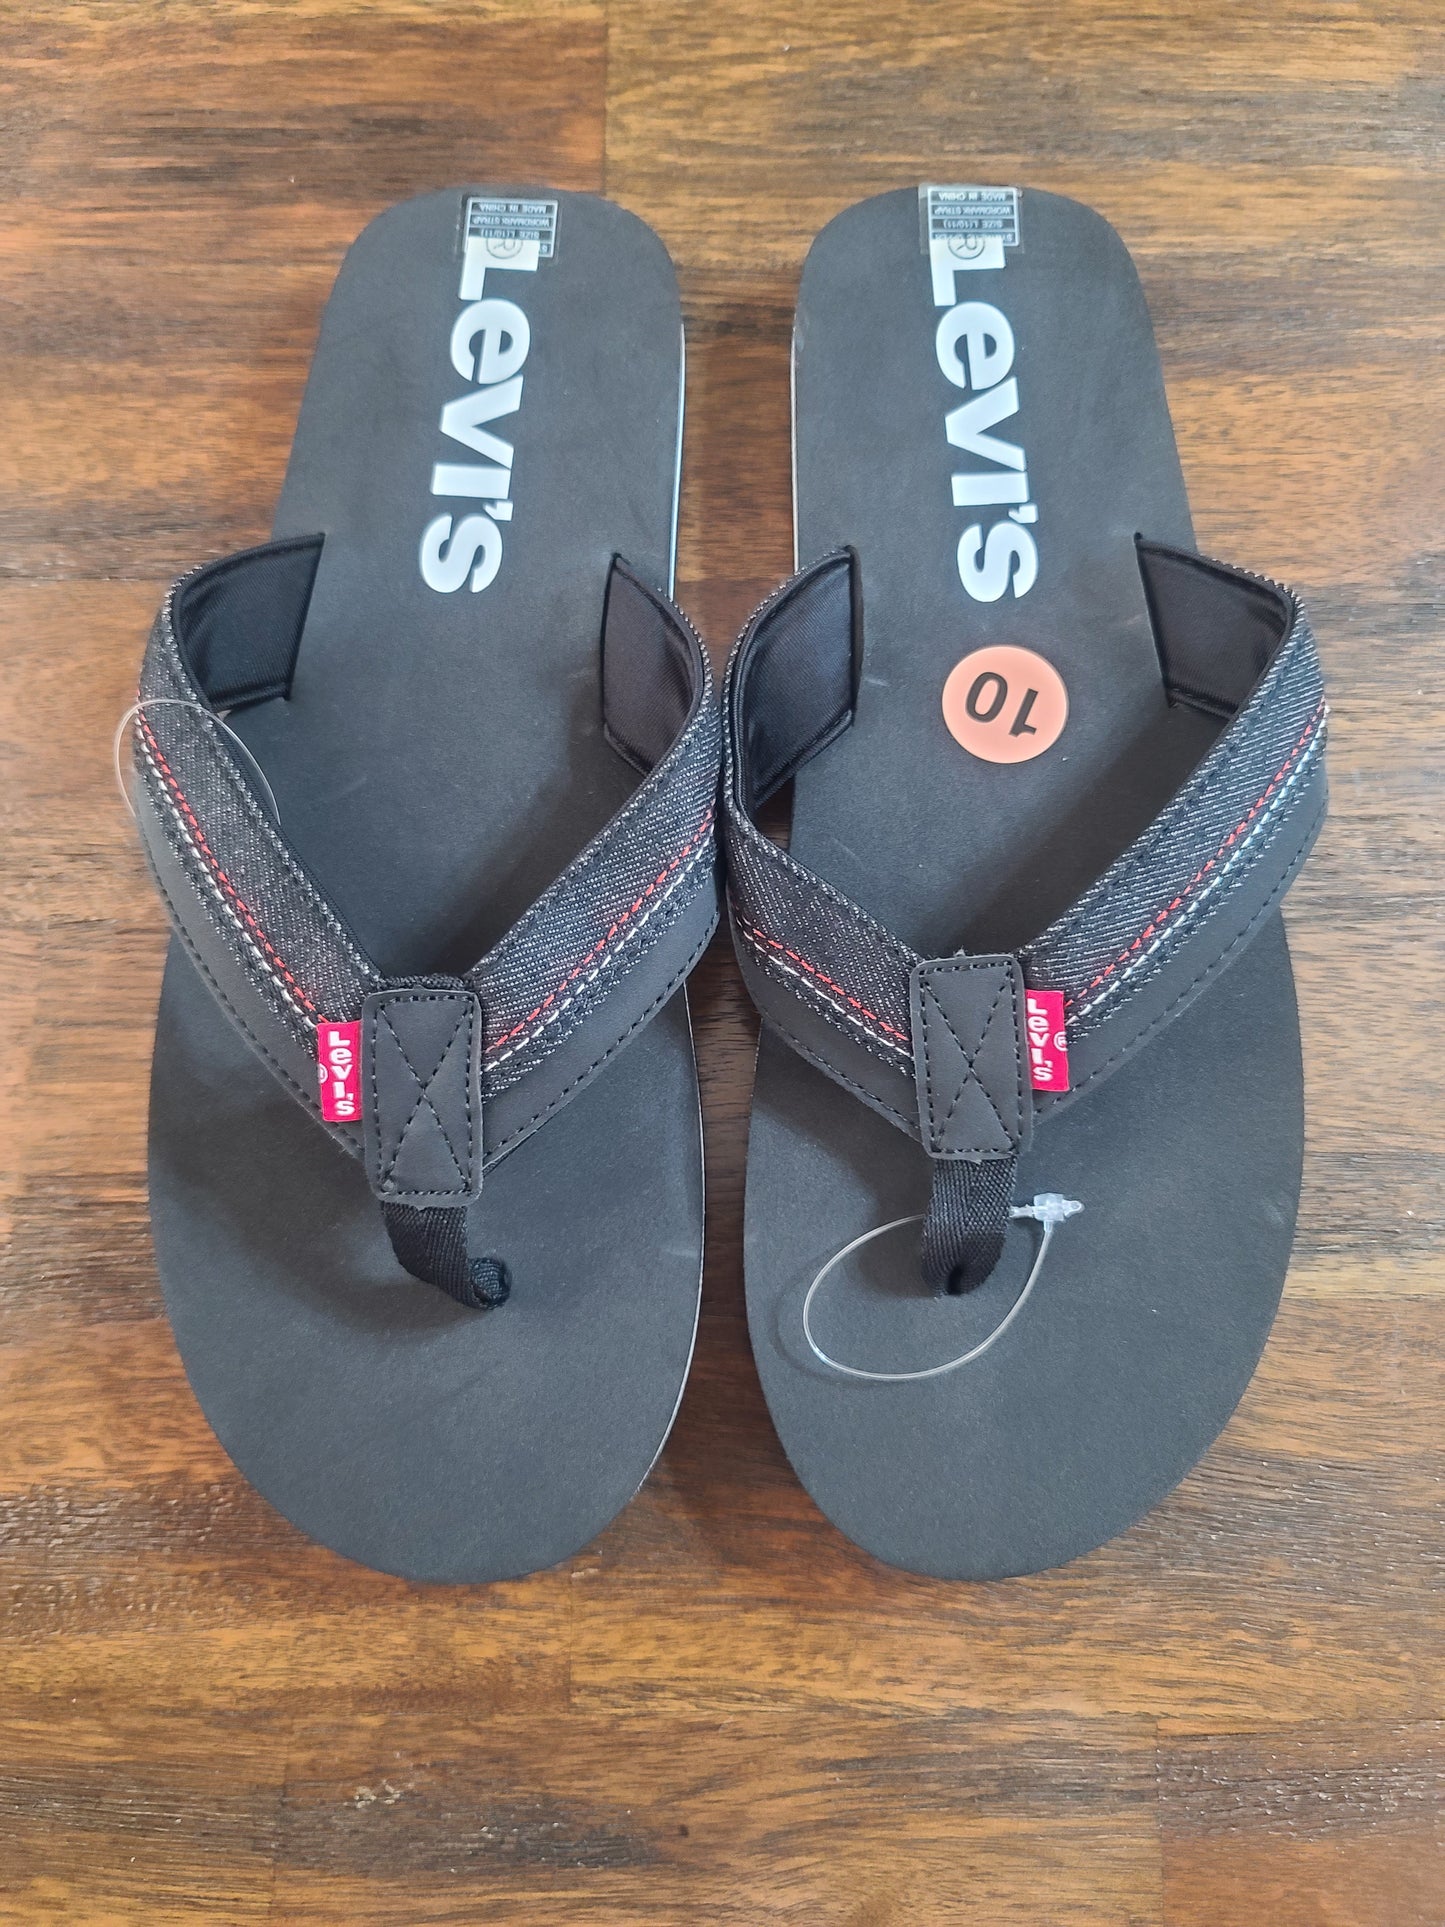 Levi's Slippers (Size 10)